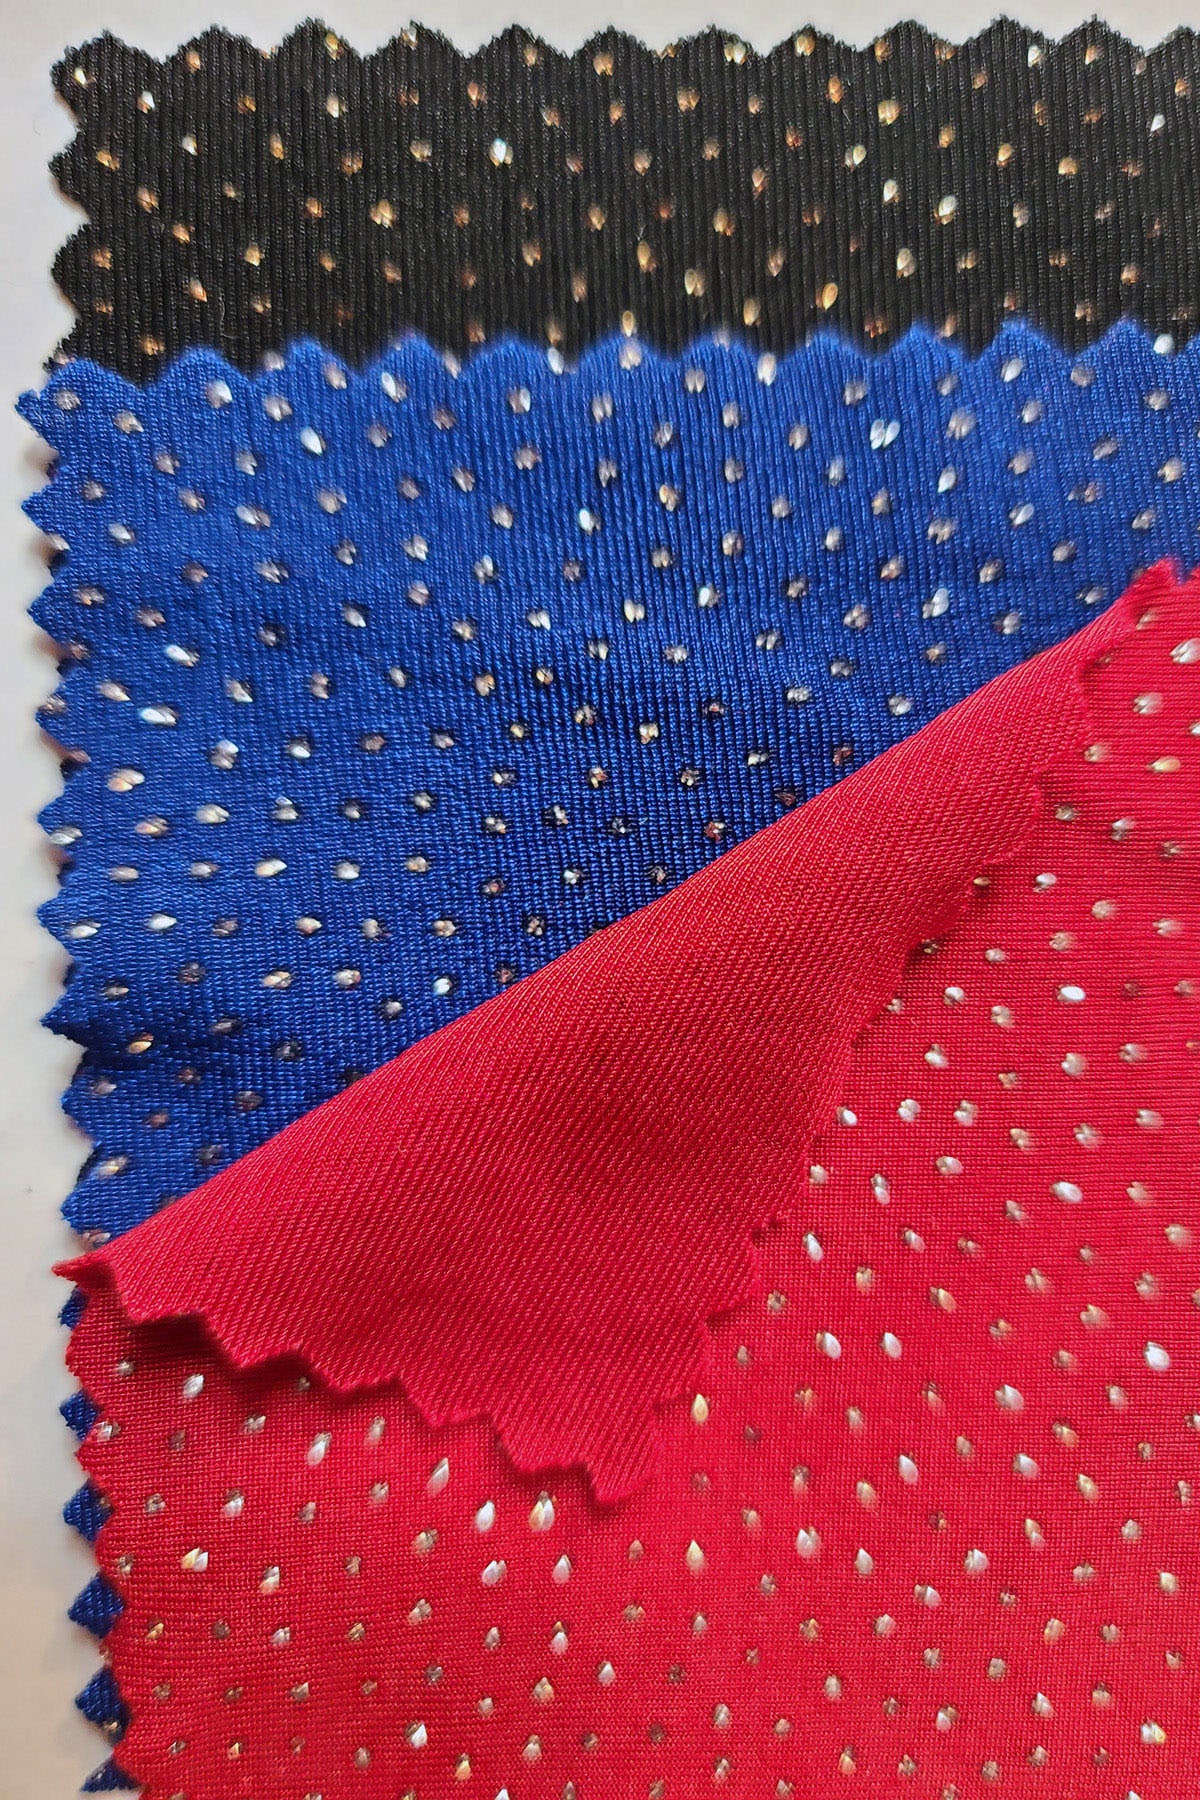 Black, blue, and red pieces of Slinky fabric.